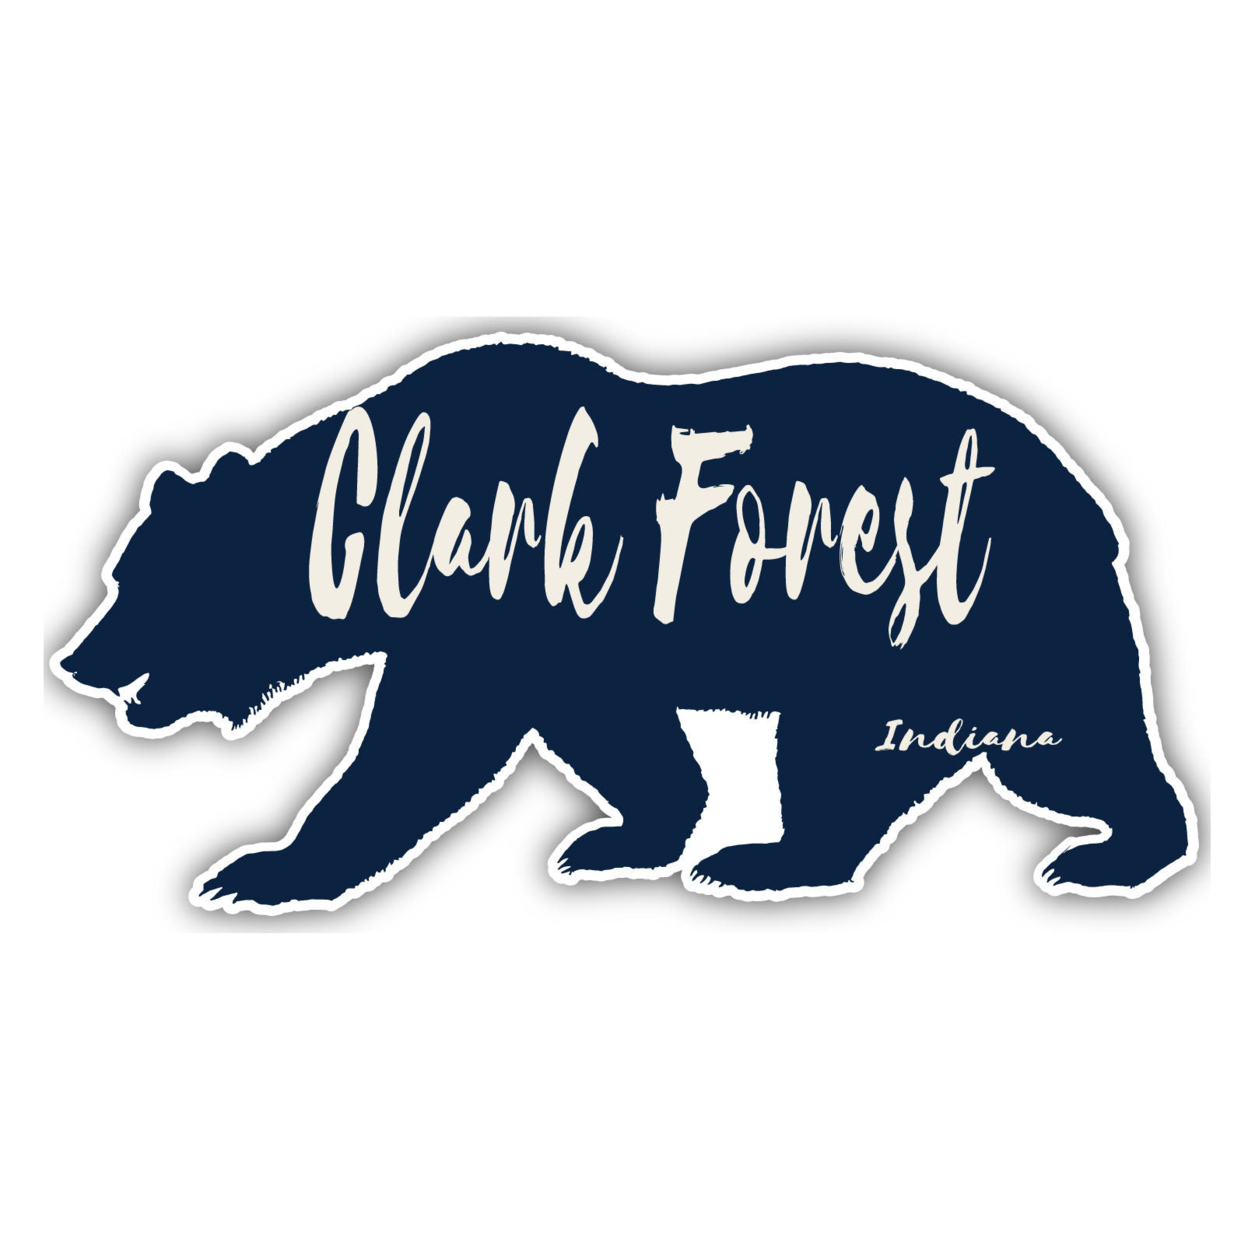 Clark Forest Indiana Souvenir Decorative Stickers (Choose Theme And Size) - Single Unit, 2-Inch, Bear